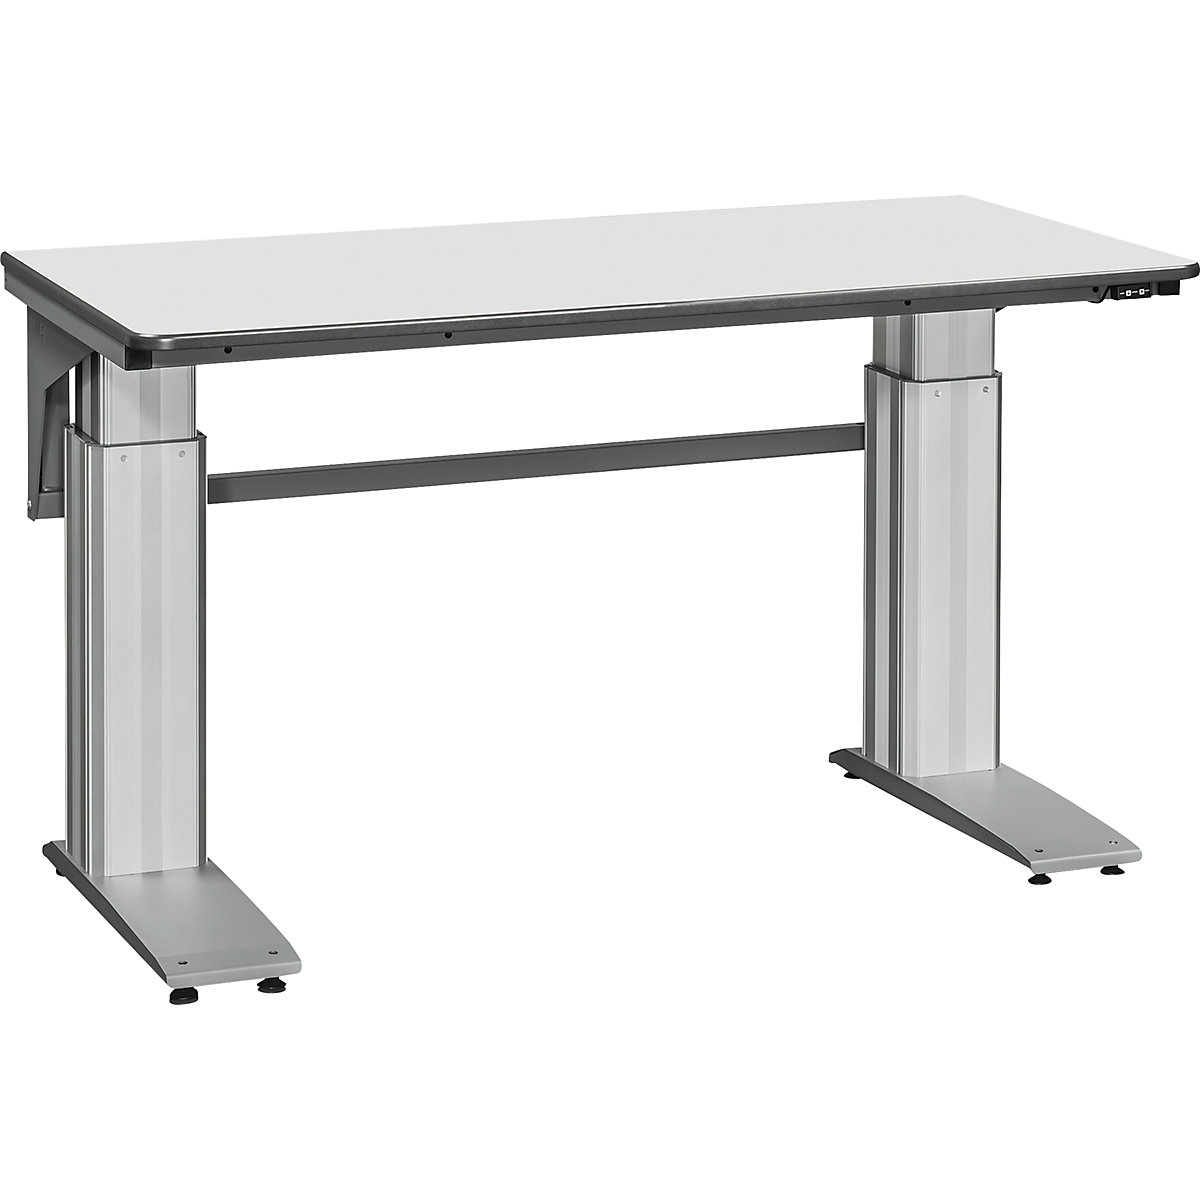 Electrically height adjustable work table